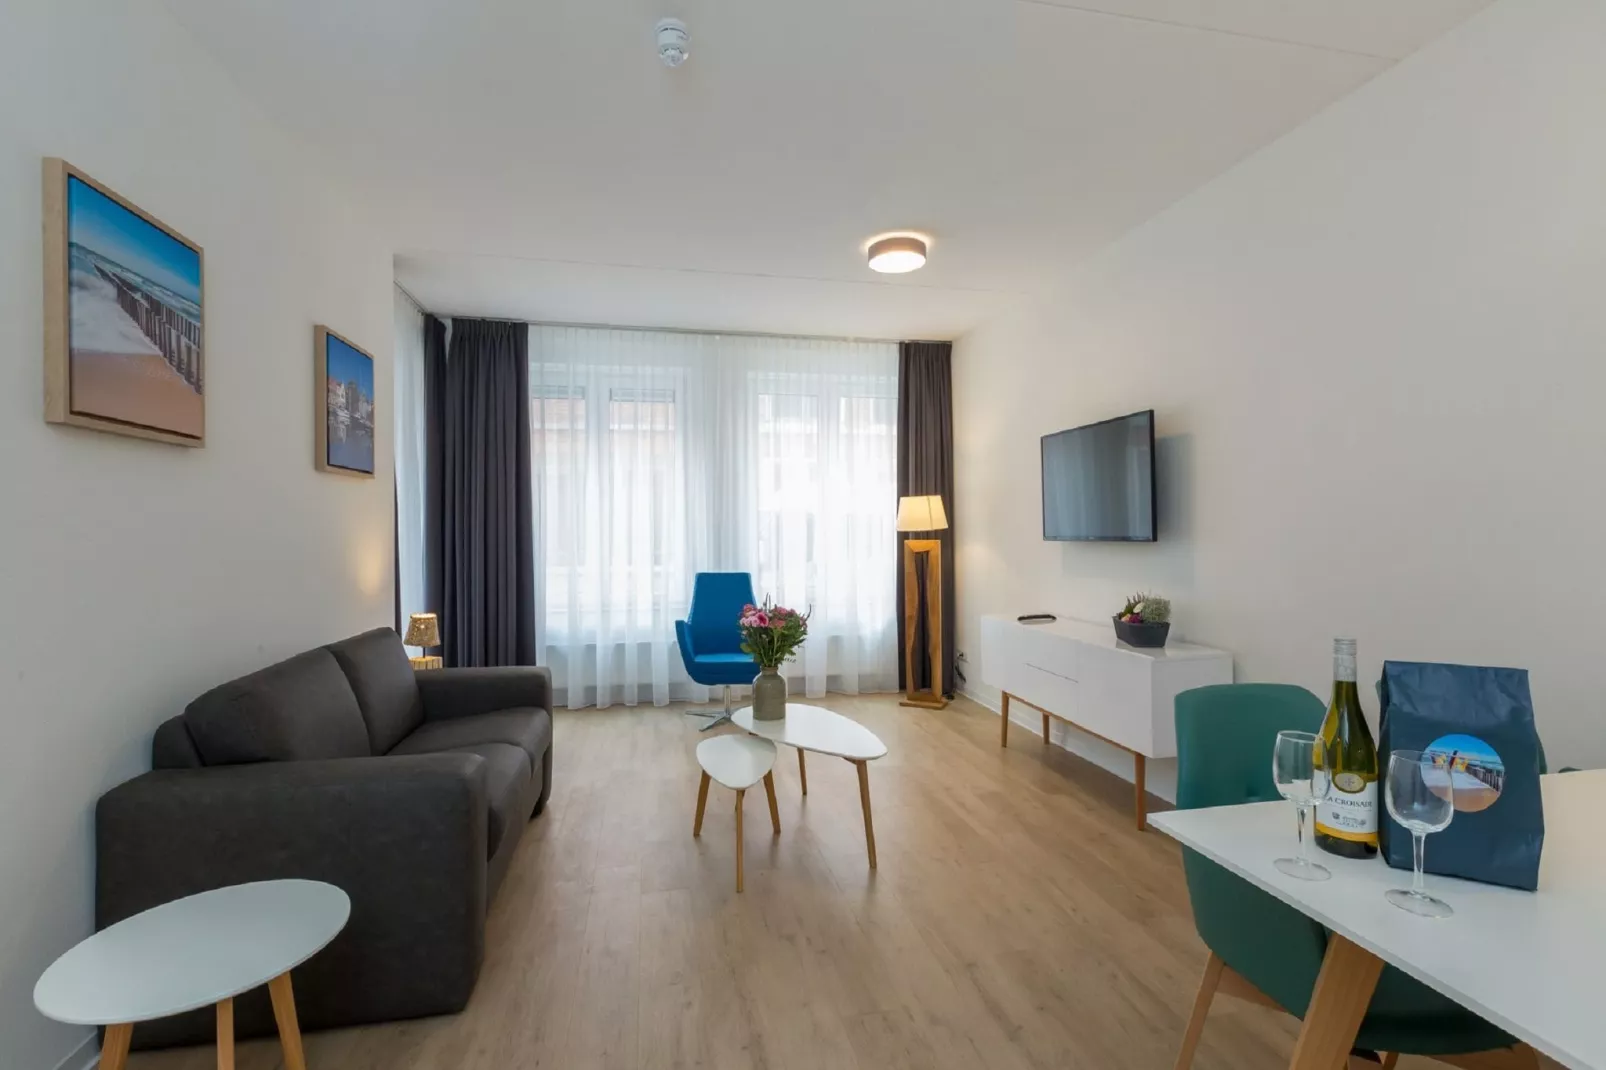 Aparthotel Zoutelande - 6 pers luxe appartement-Woonkamer